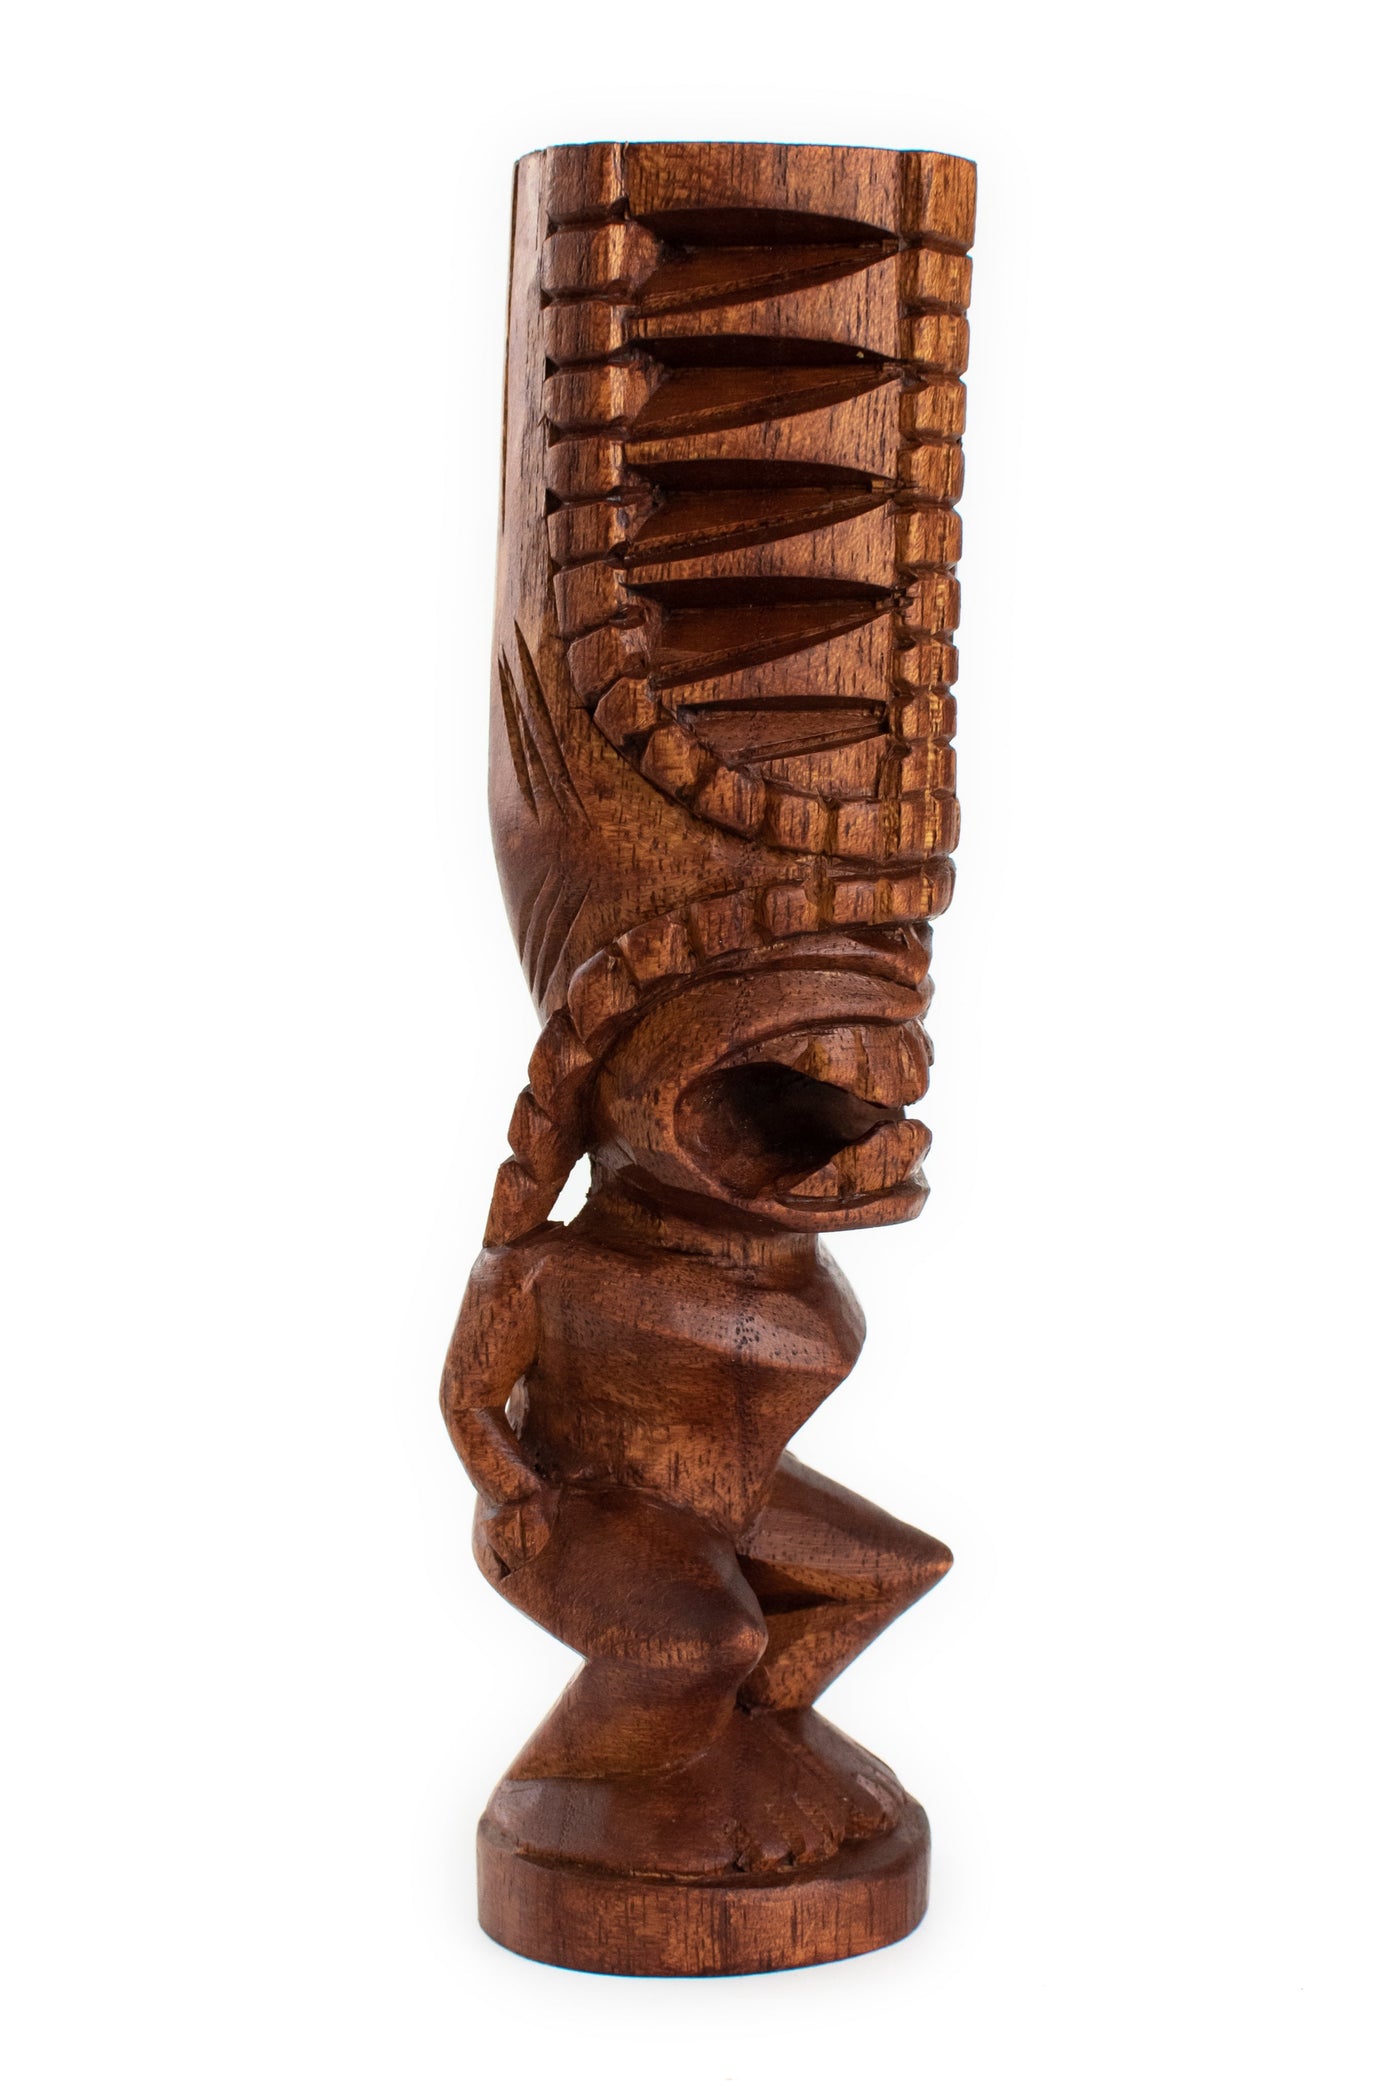 Handmade Wooden Primitive Angry Face Big Forehead Tribal Statue Sculpture Tiki Bar Handcrafted Unique Home Decor Accent Figurine Artwork Hand Carved